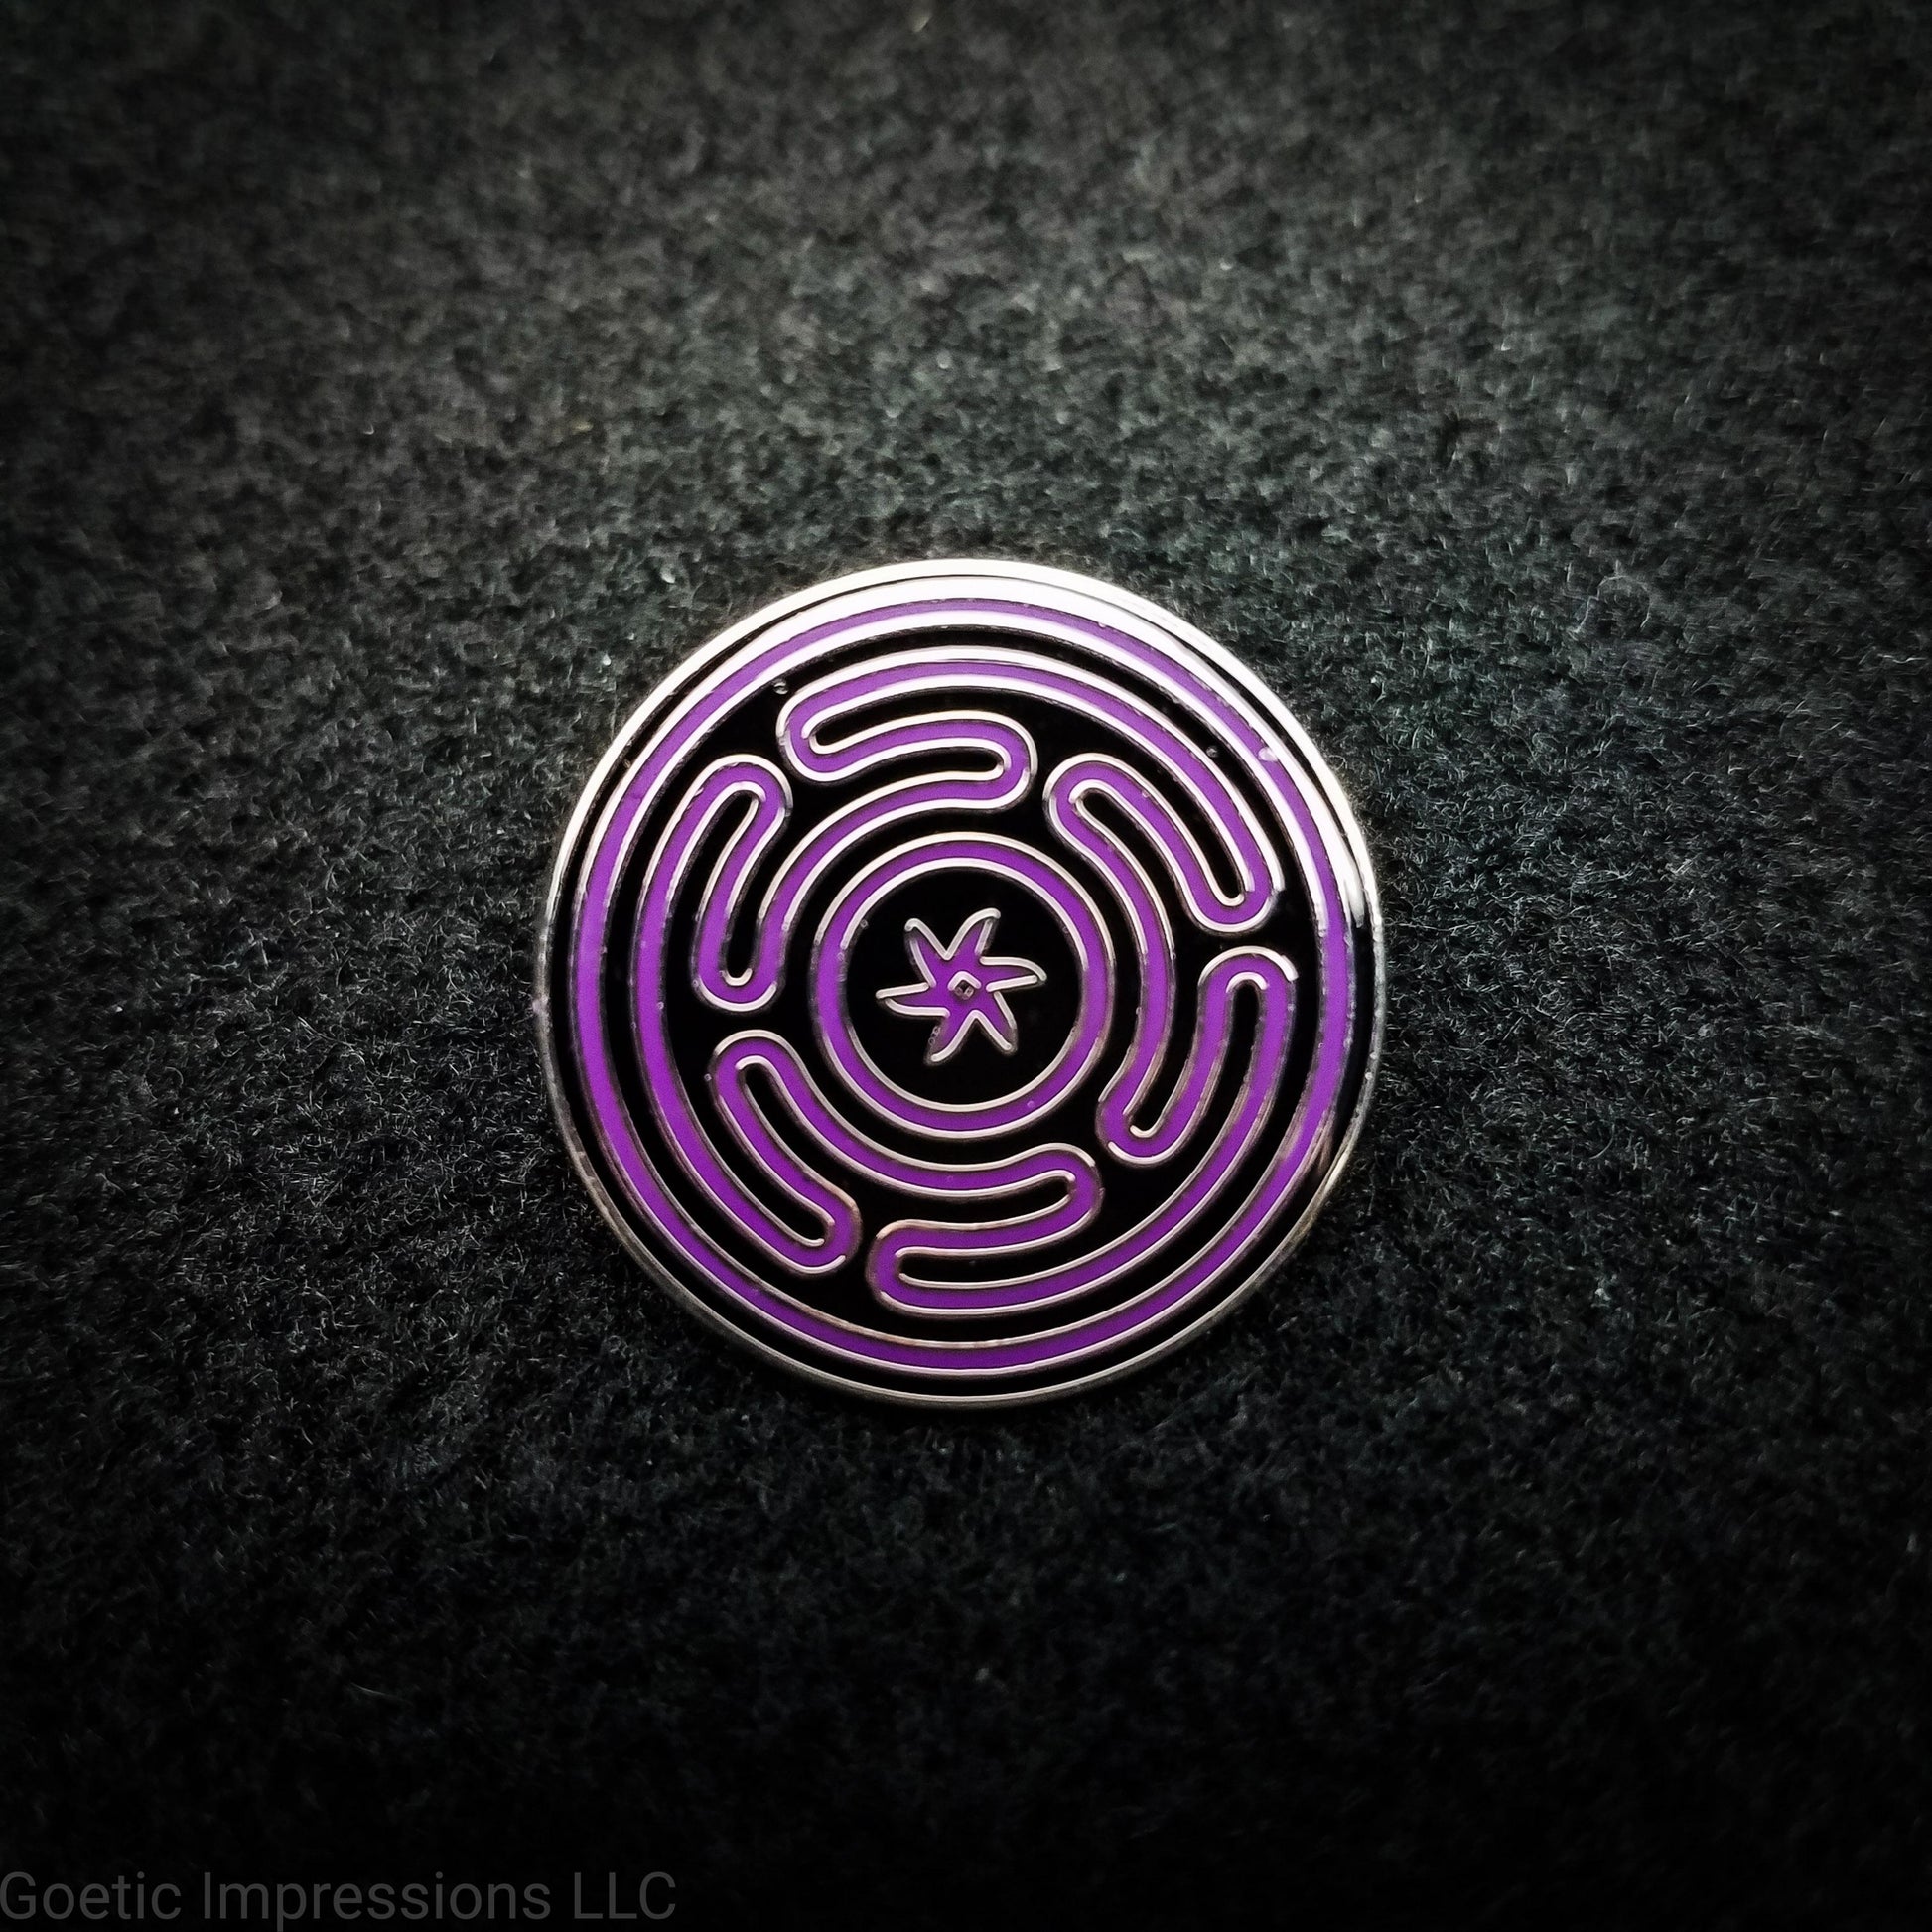 A silver plated hard enamel Hecate sigil pin. The sigil is purple on a black background with a silver plated outline.